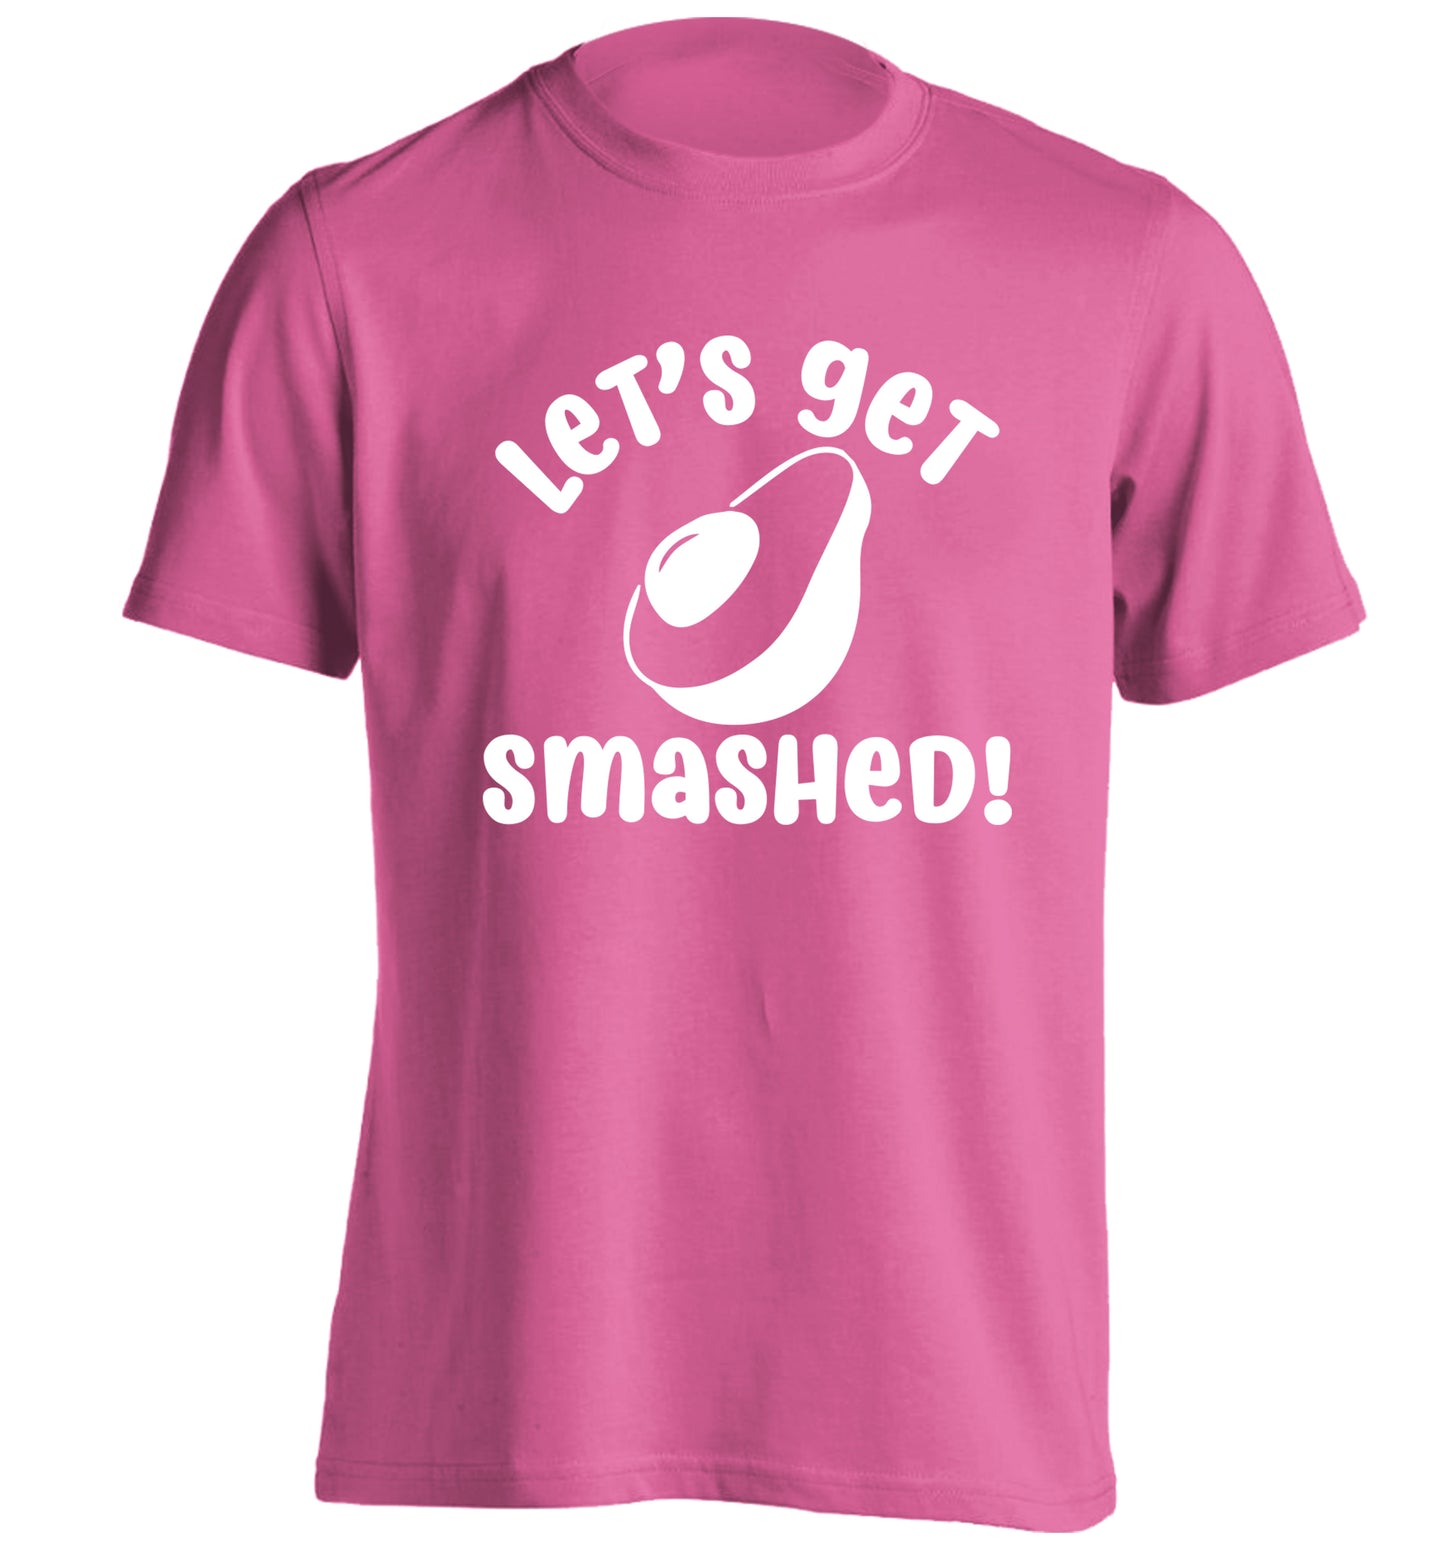 Let's get smashed adults unisex pink Tshirt 2XL